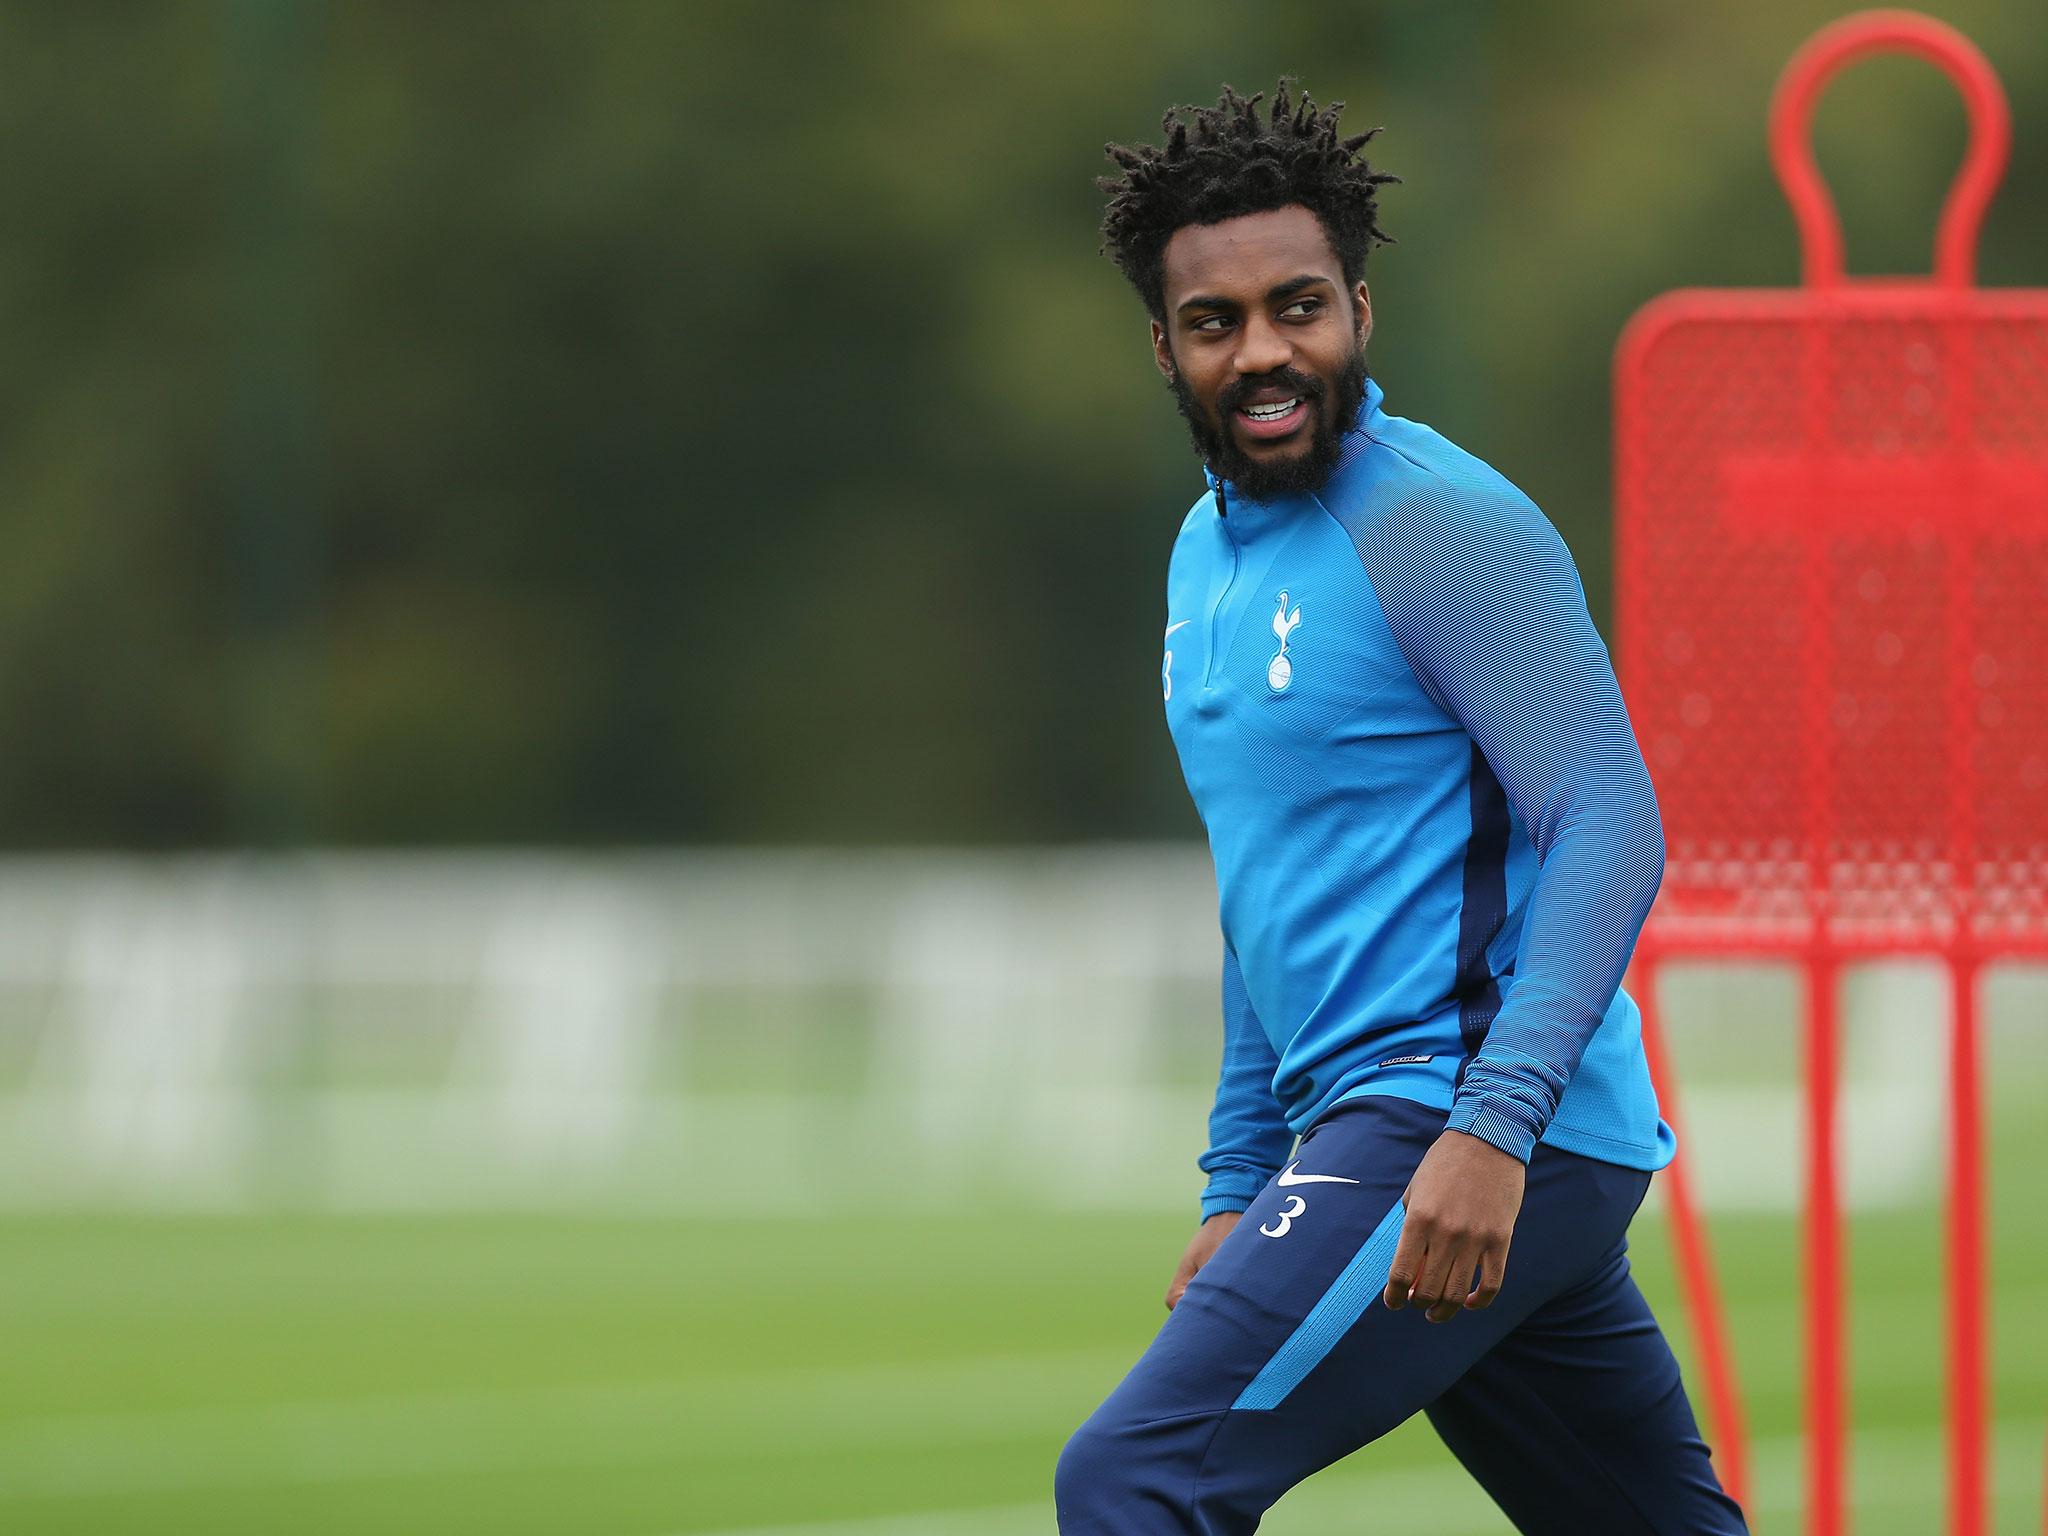 Danny Rose has not played since sustaining a medial knee ligament injury on 31 January